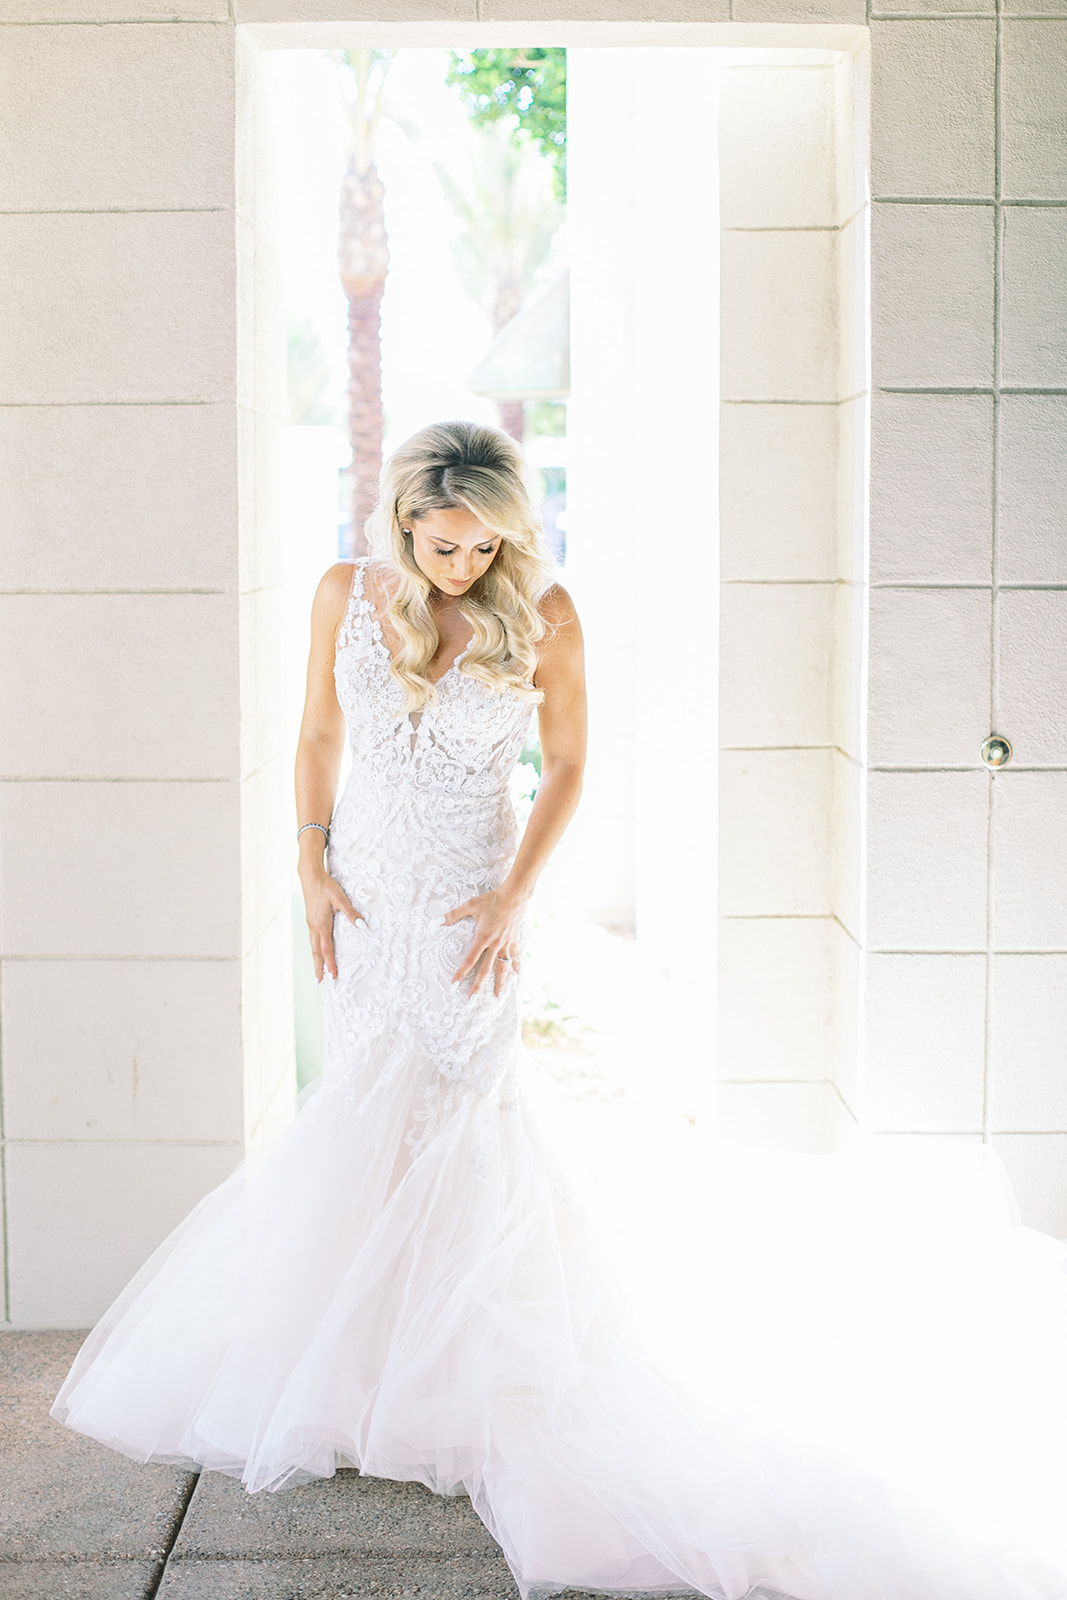 Bride and white mermaid wedding dress with trailing train.